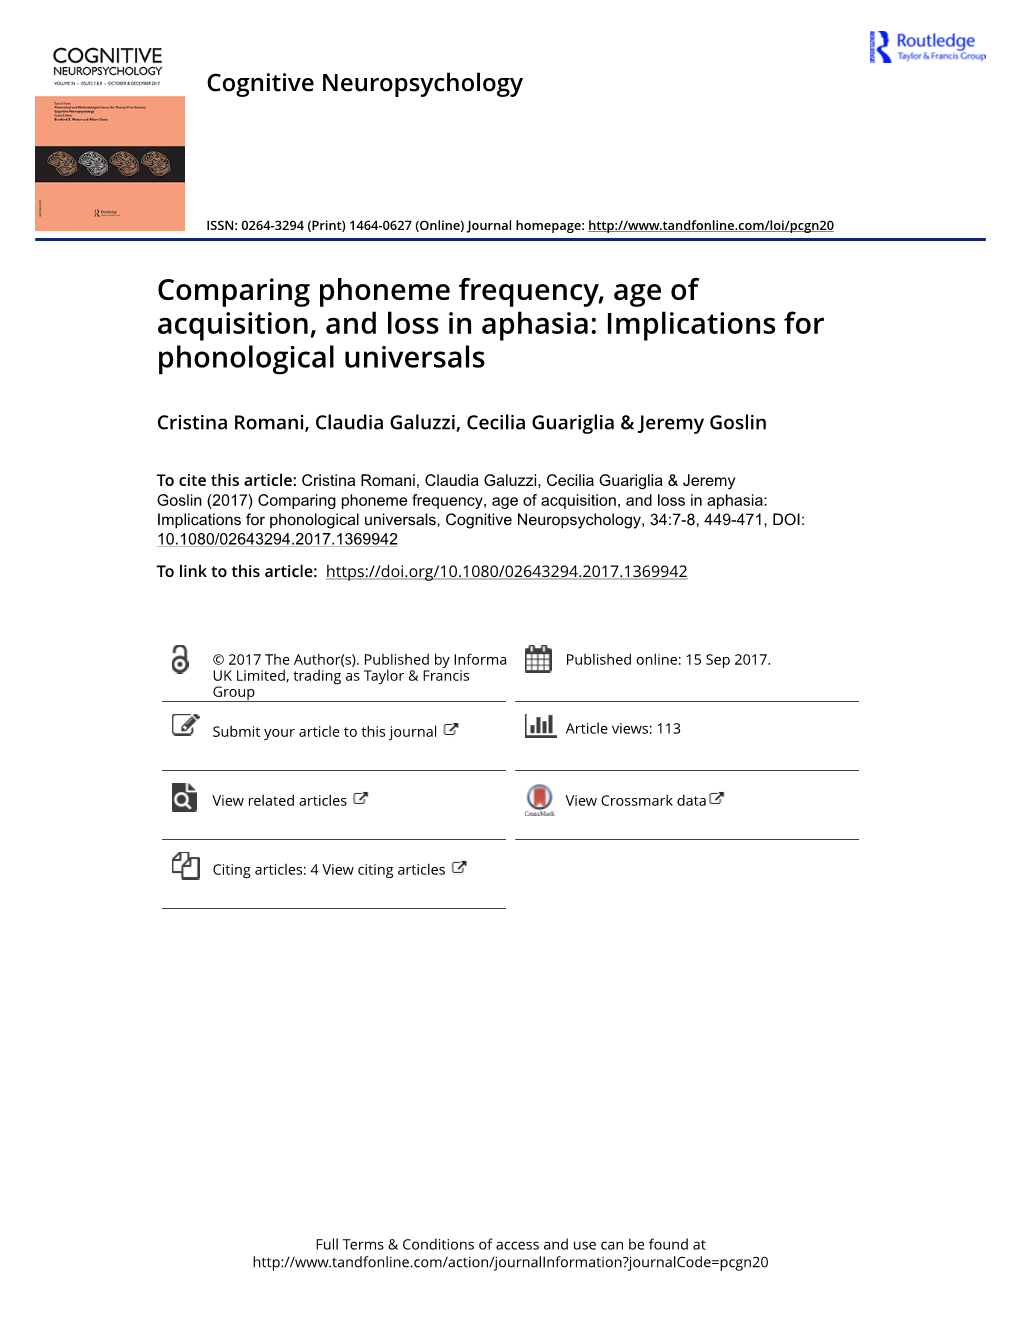 Comparing Phoneme Frequency, Age of Acquisition, and Loss in Aphasia: Implications for Phonological Universals